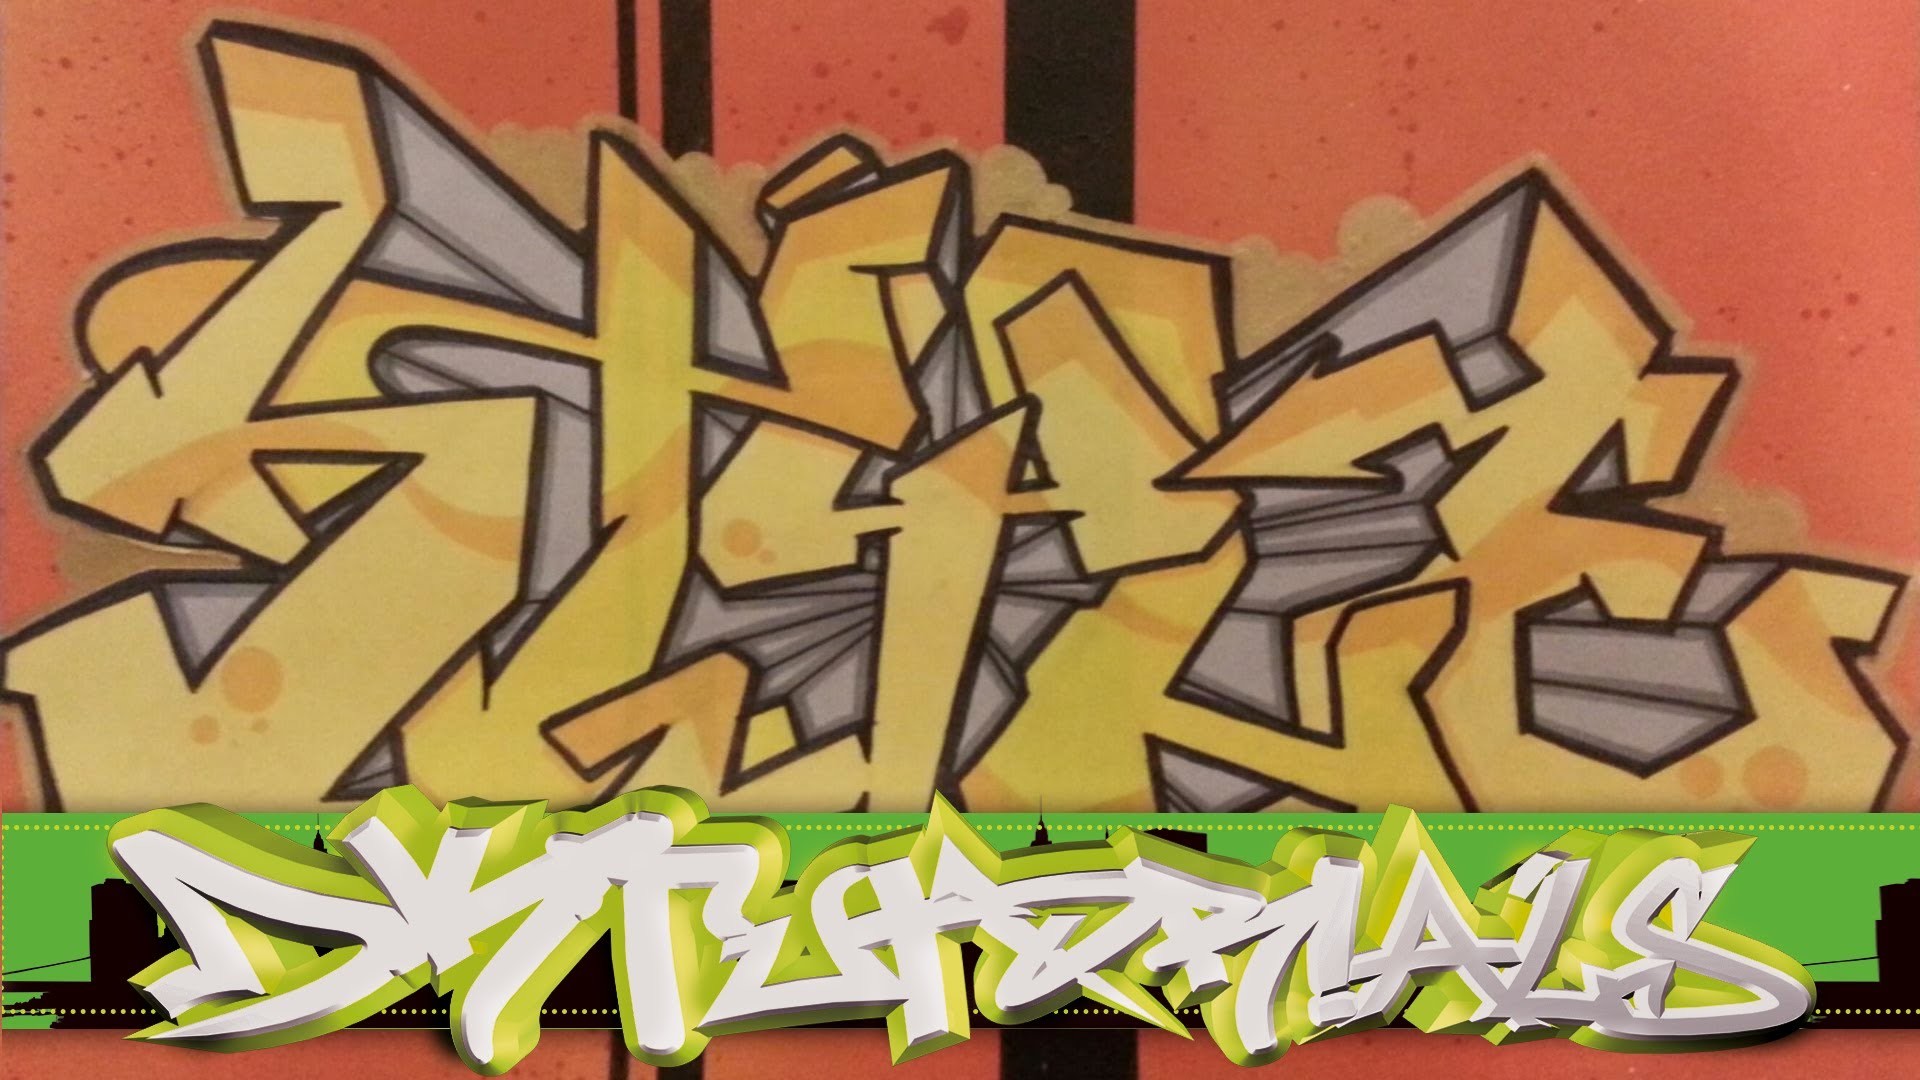 1920x1080 How to draw graffiti wildstyle letters - Graffiti style spraypaint  background - YouTube